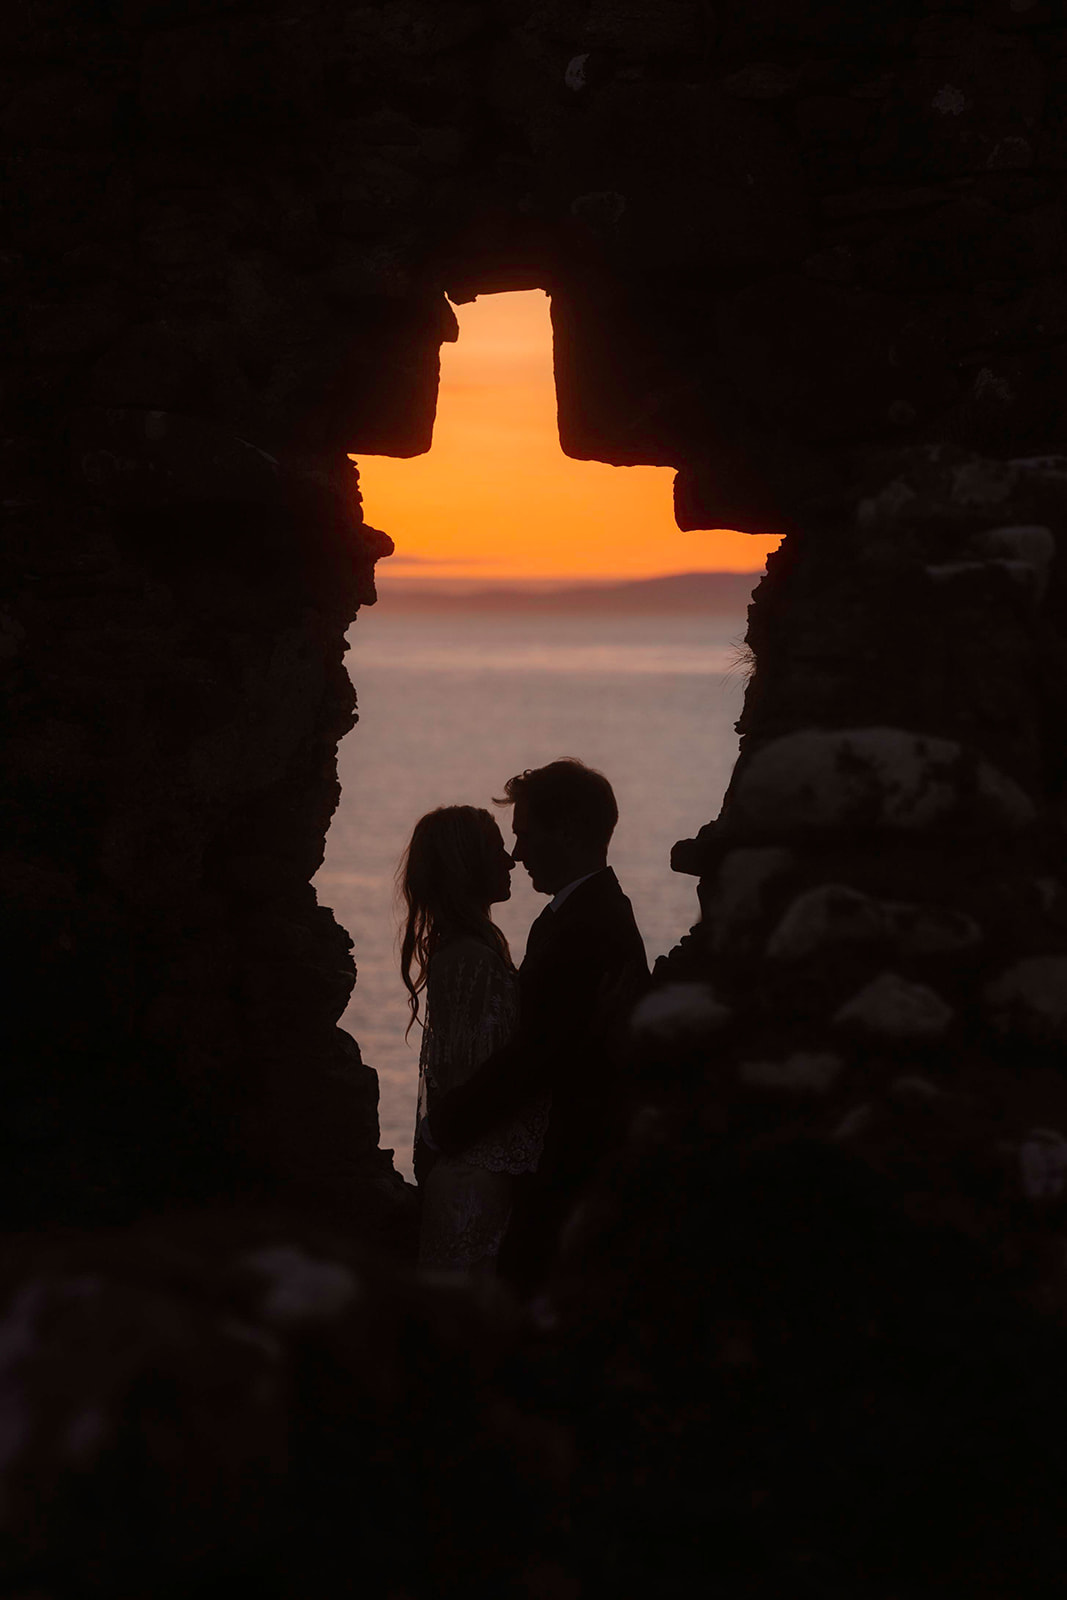 Kara and Andy bask in the glory of the breathtaking sunset at the enchanting Isle of Skye.